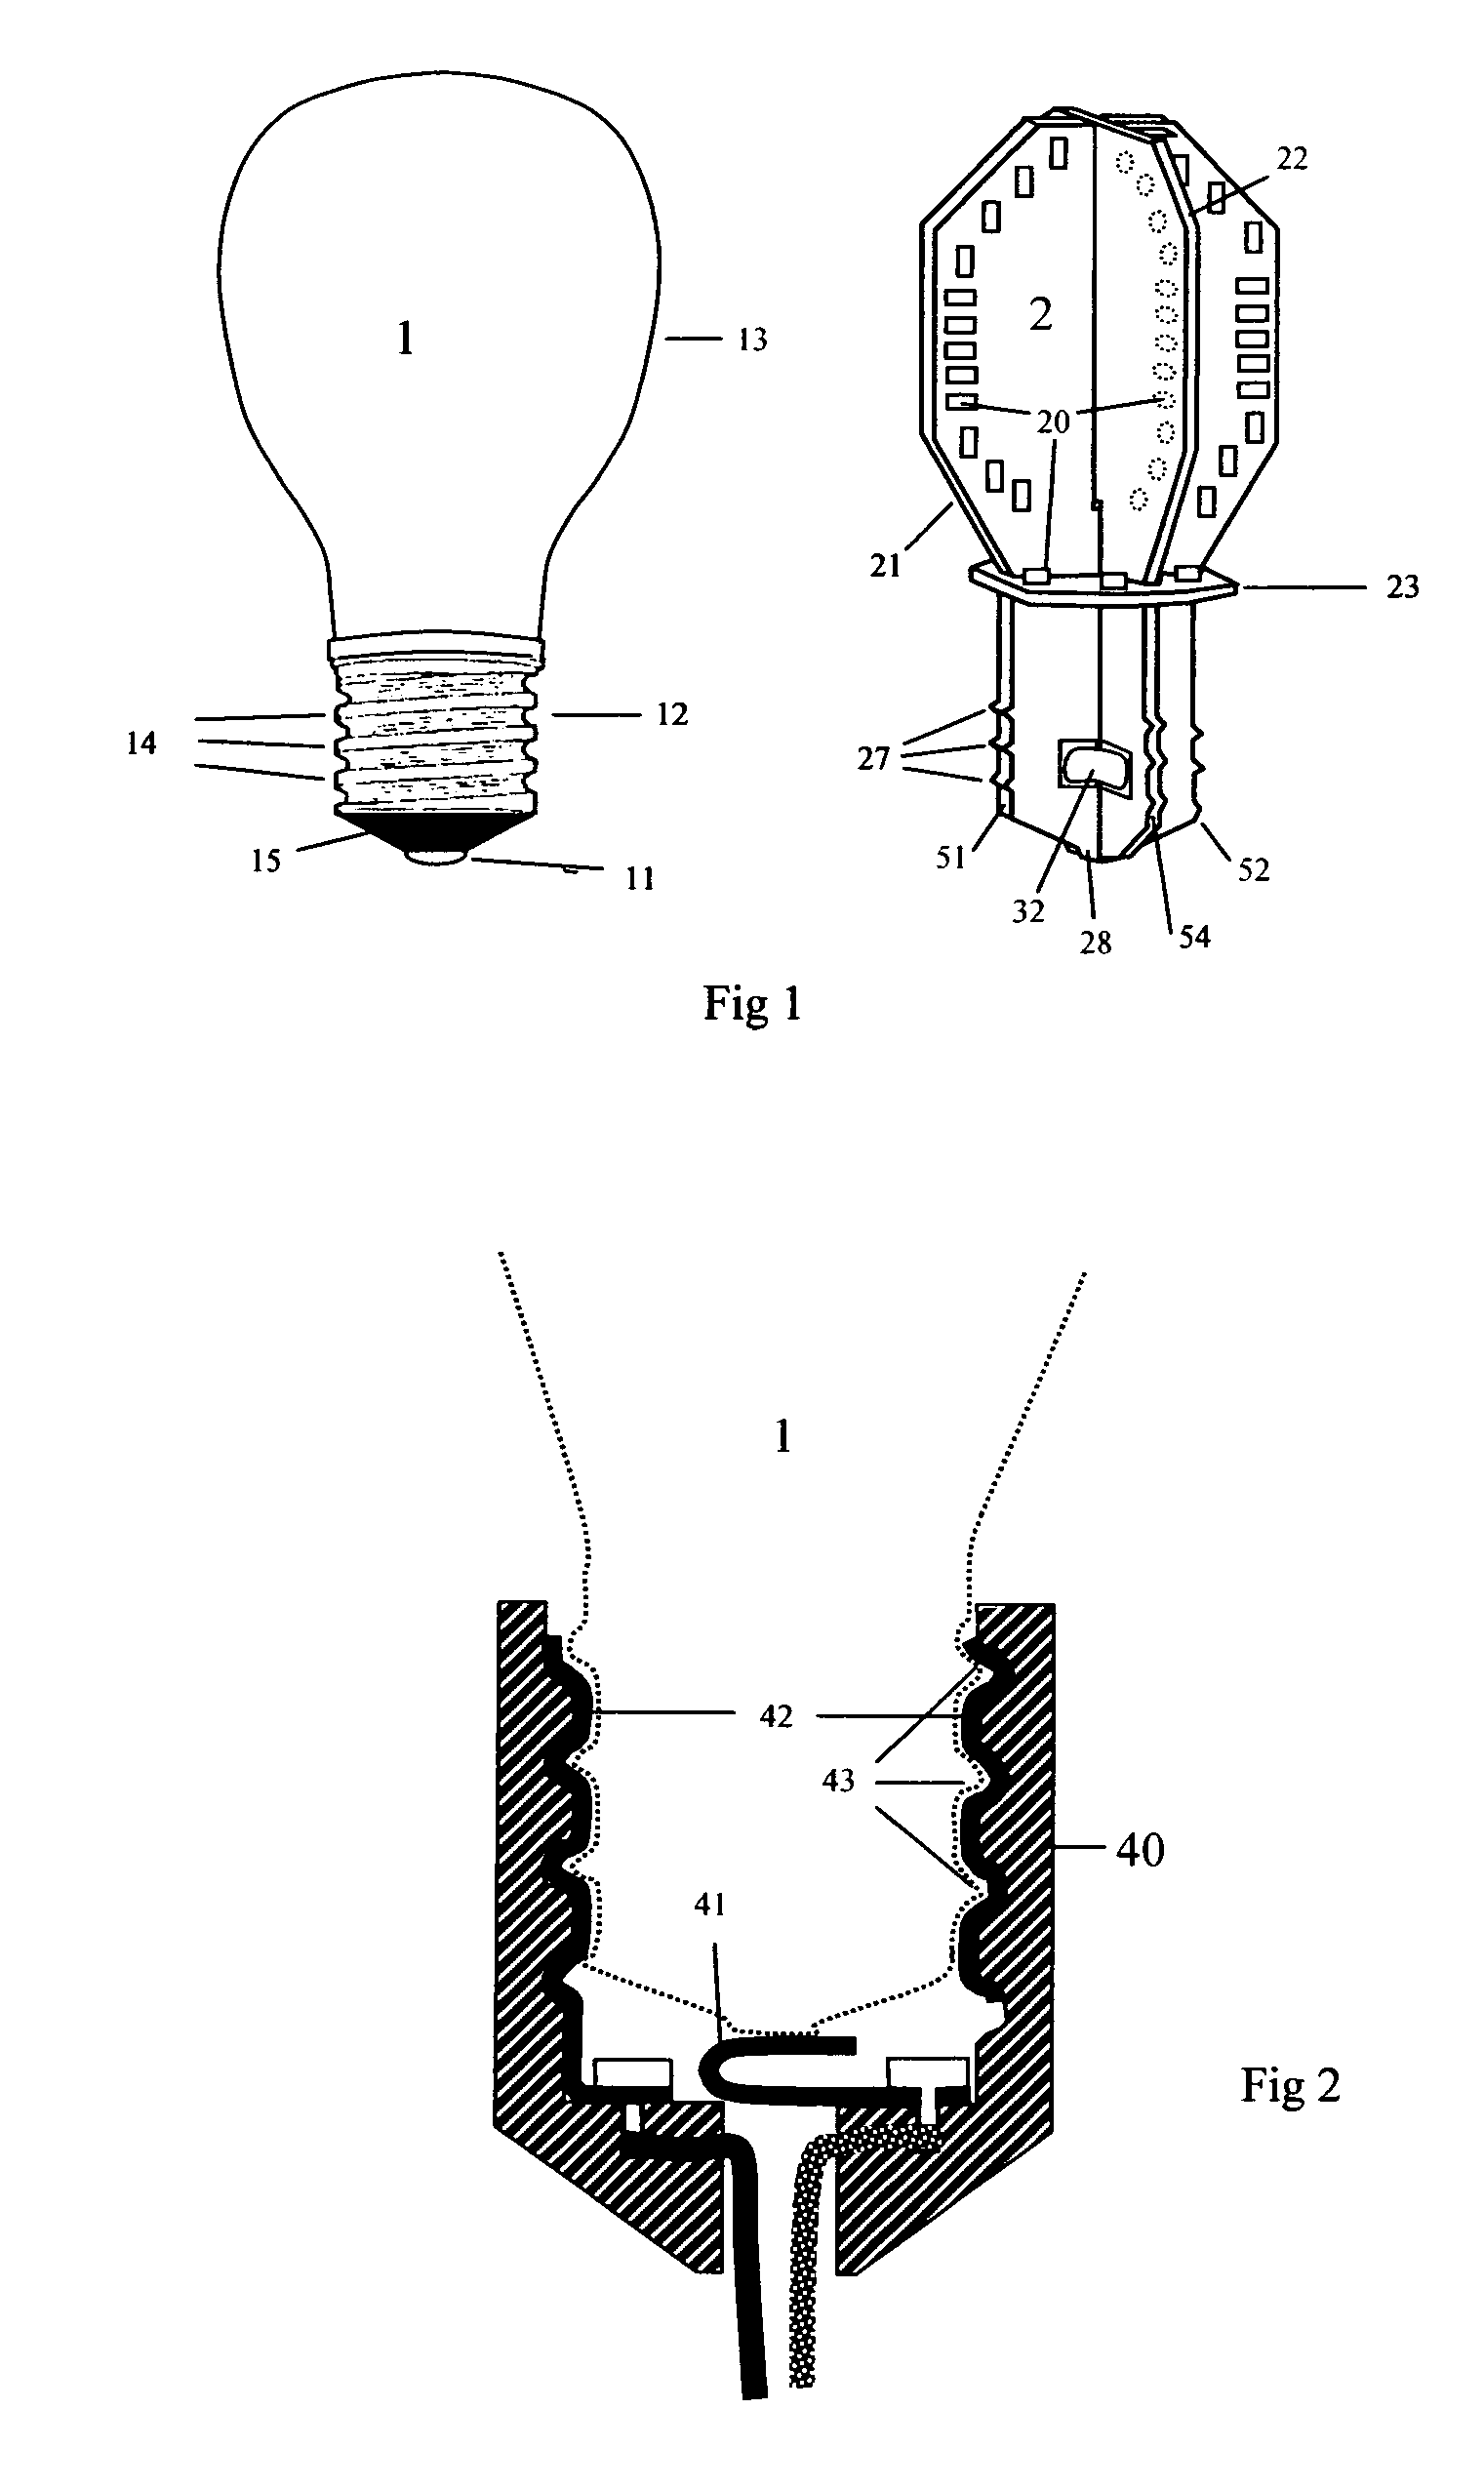 Light bulb with light emitting elements for use in conventional incandescent light bulb sockets